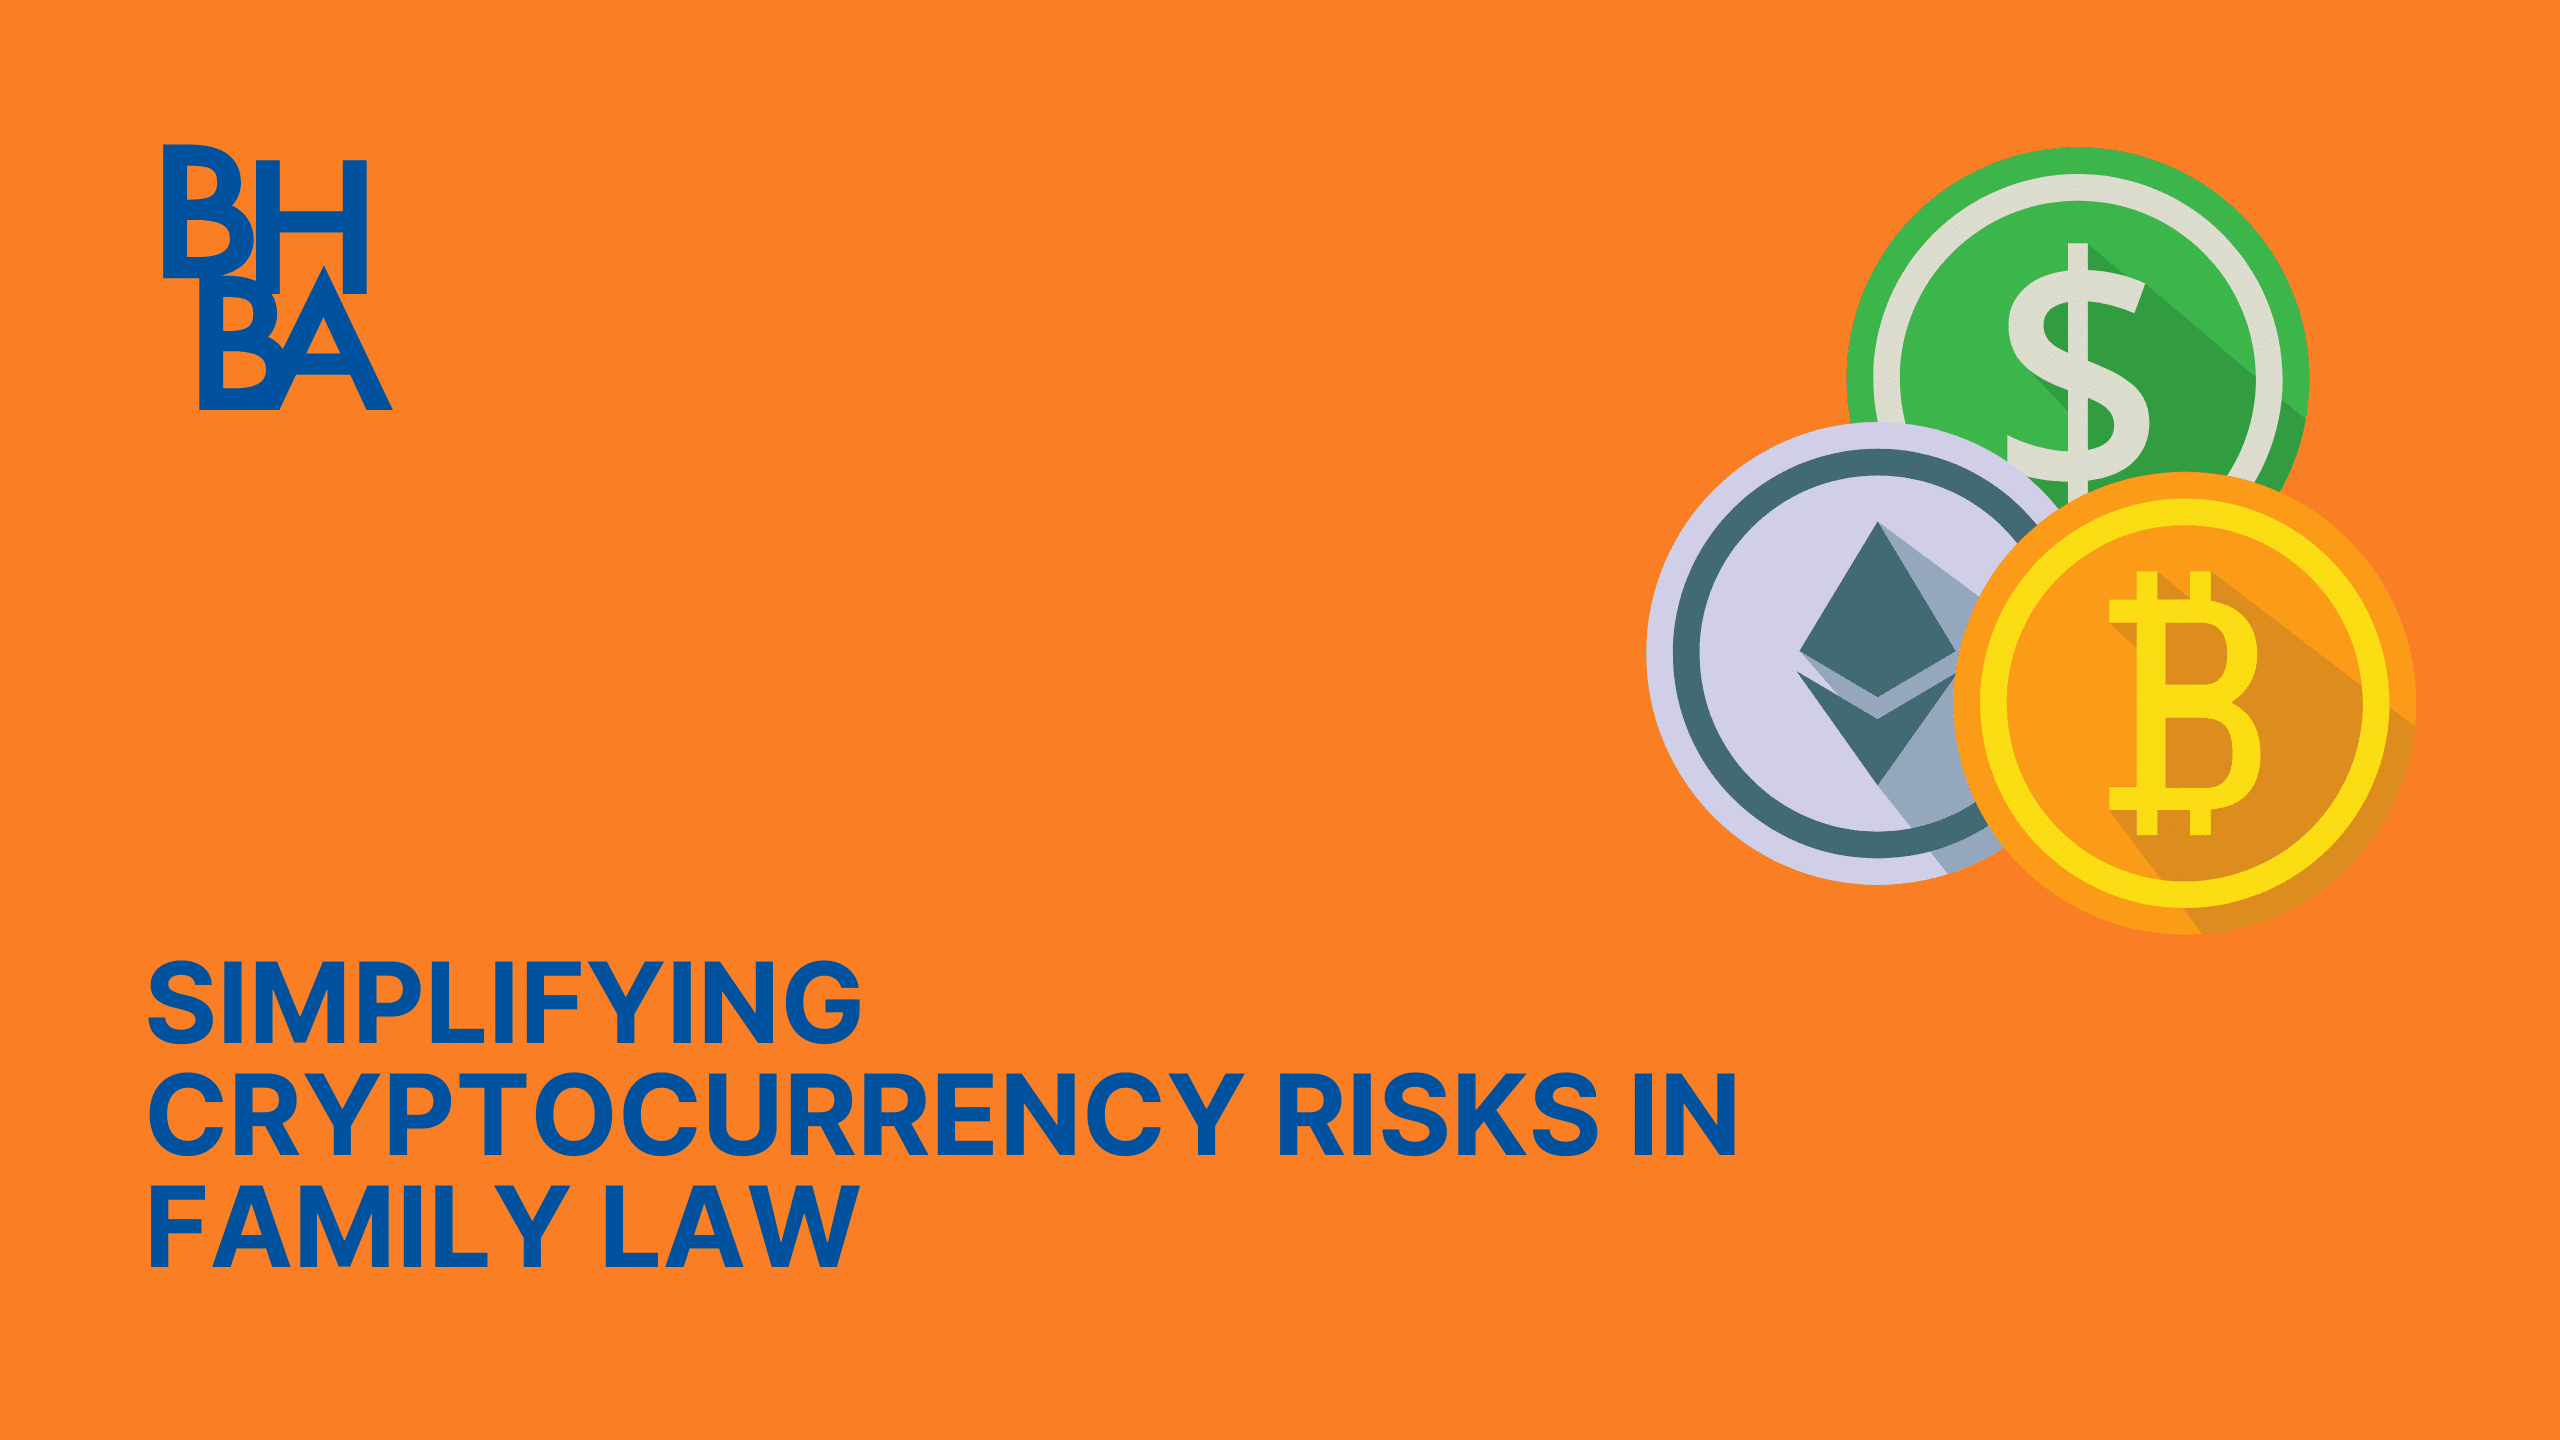 Simplifying Cryptocurrency Risks in Family Law: From the Brady Bunch to Bezos, Digital Assets are Coming to a Divorce Near You